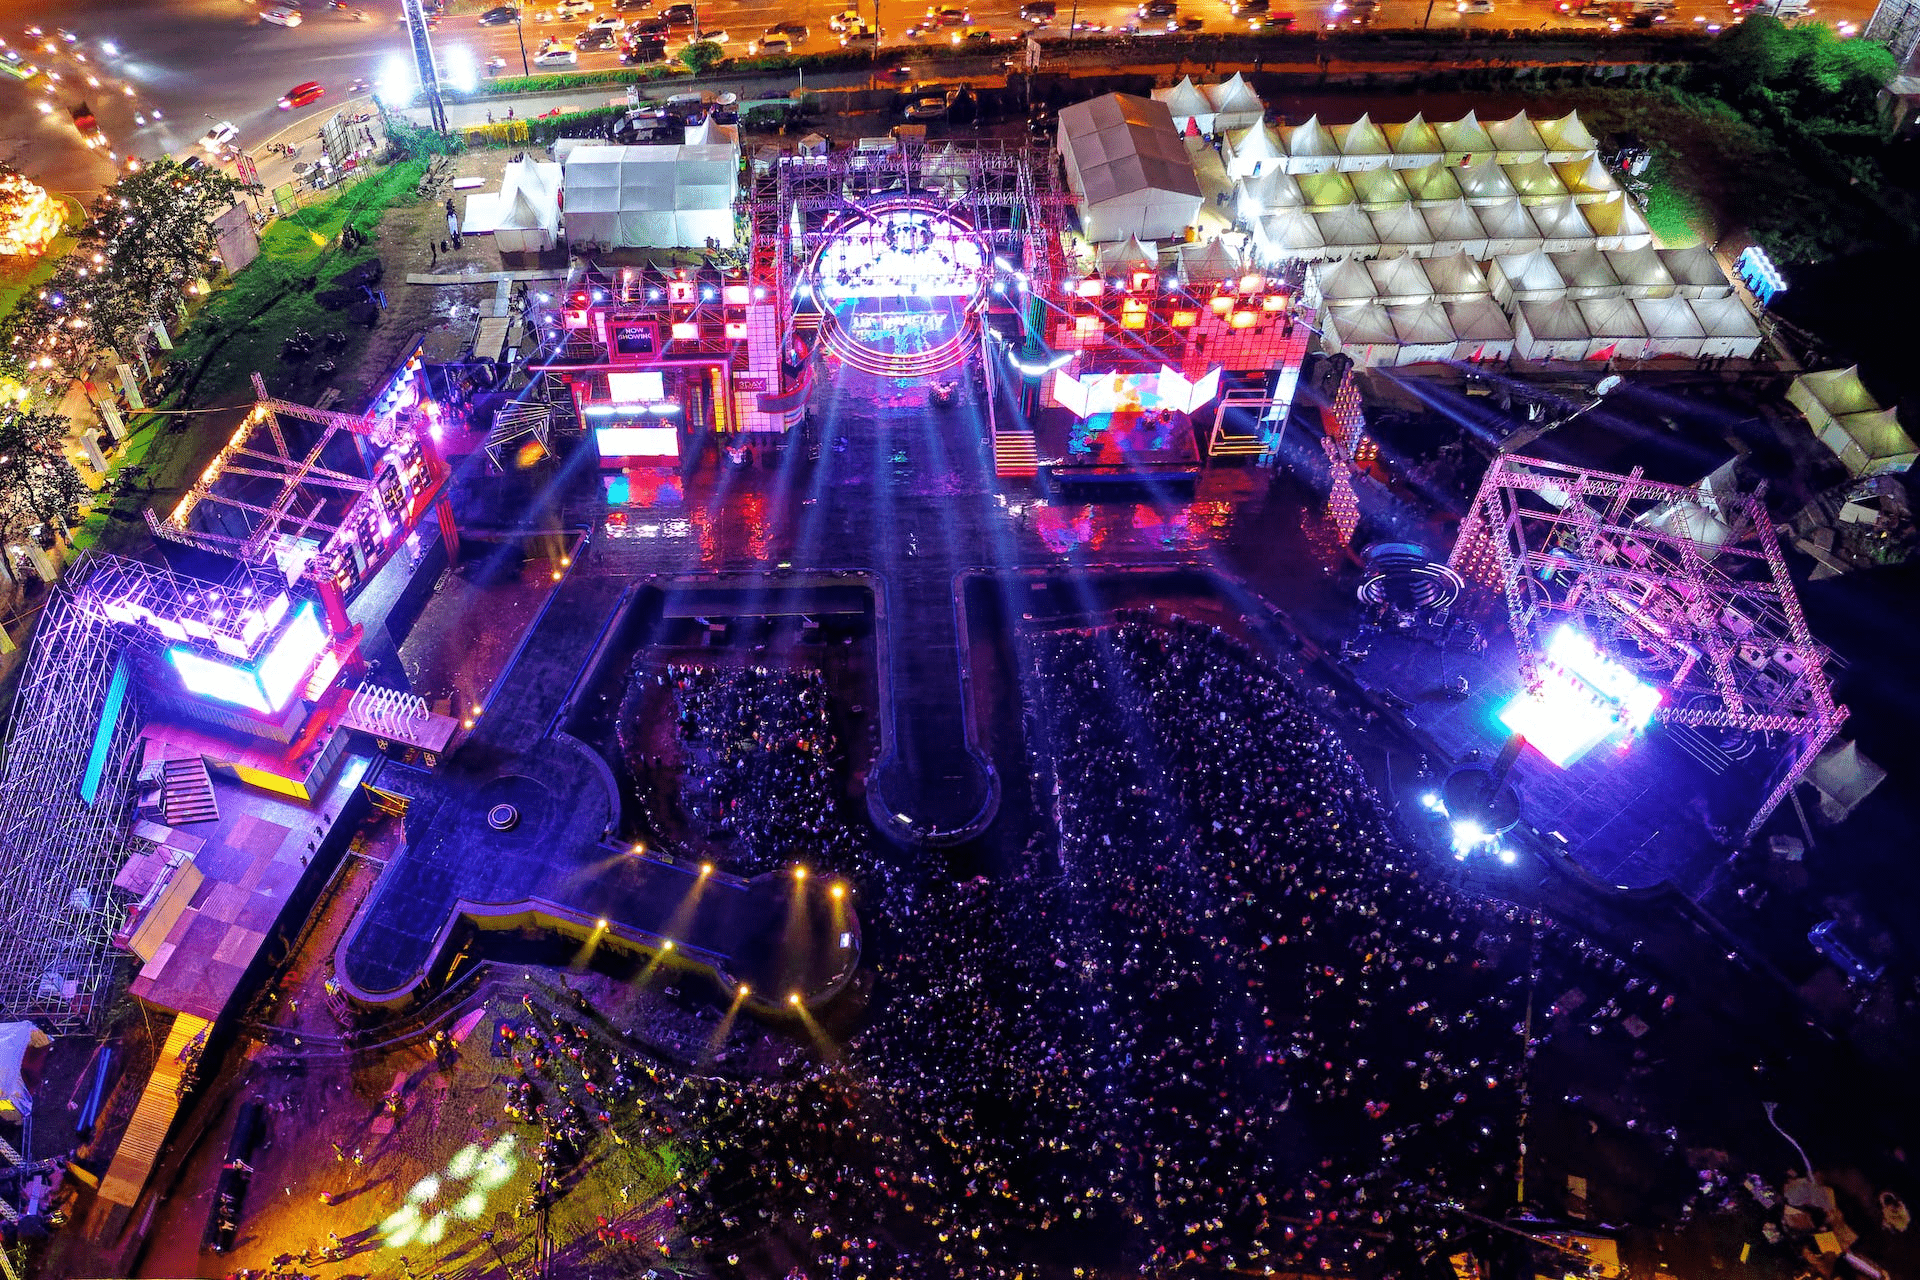 A music festival outdoors